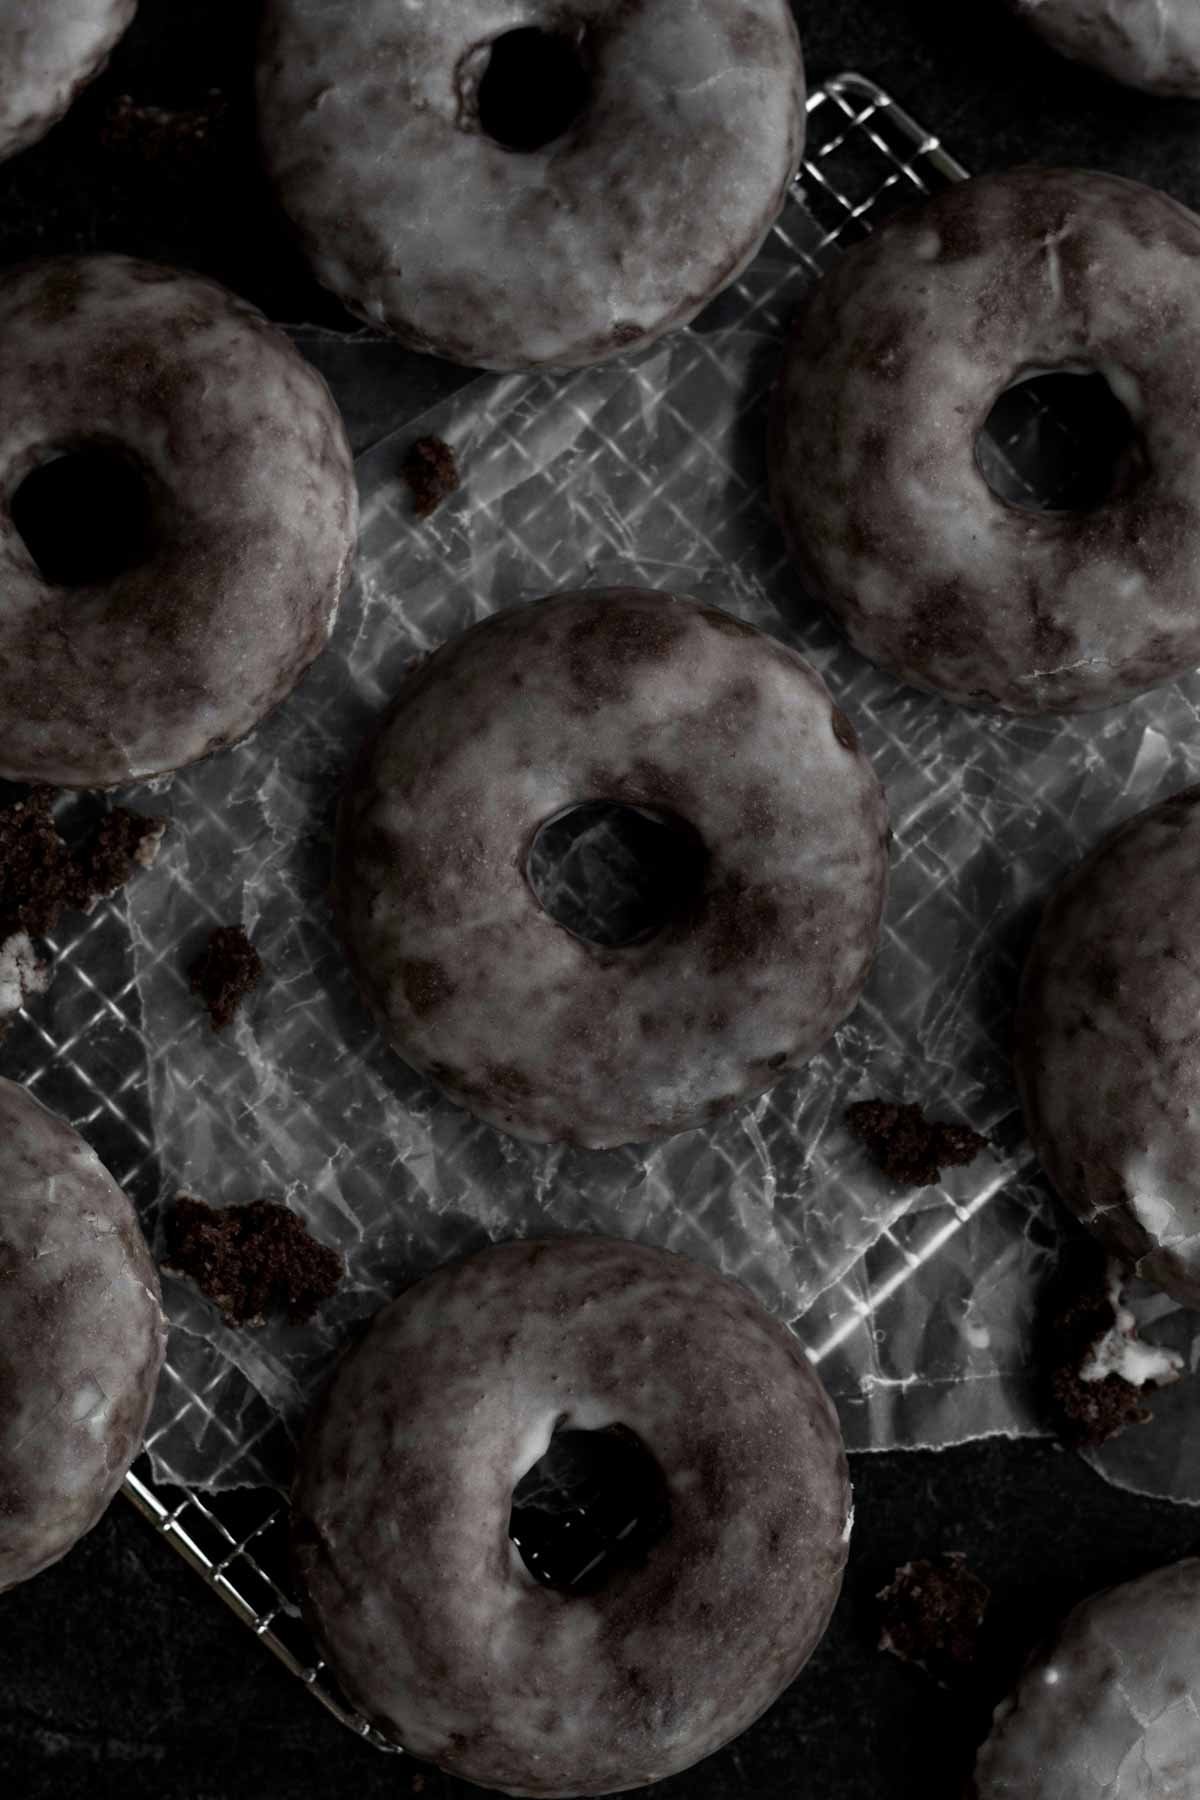 Looking down at the cloudy vanilla glaze on these donuts.